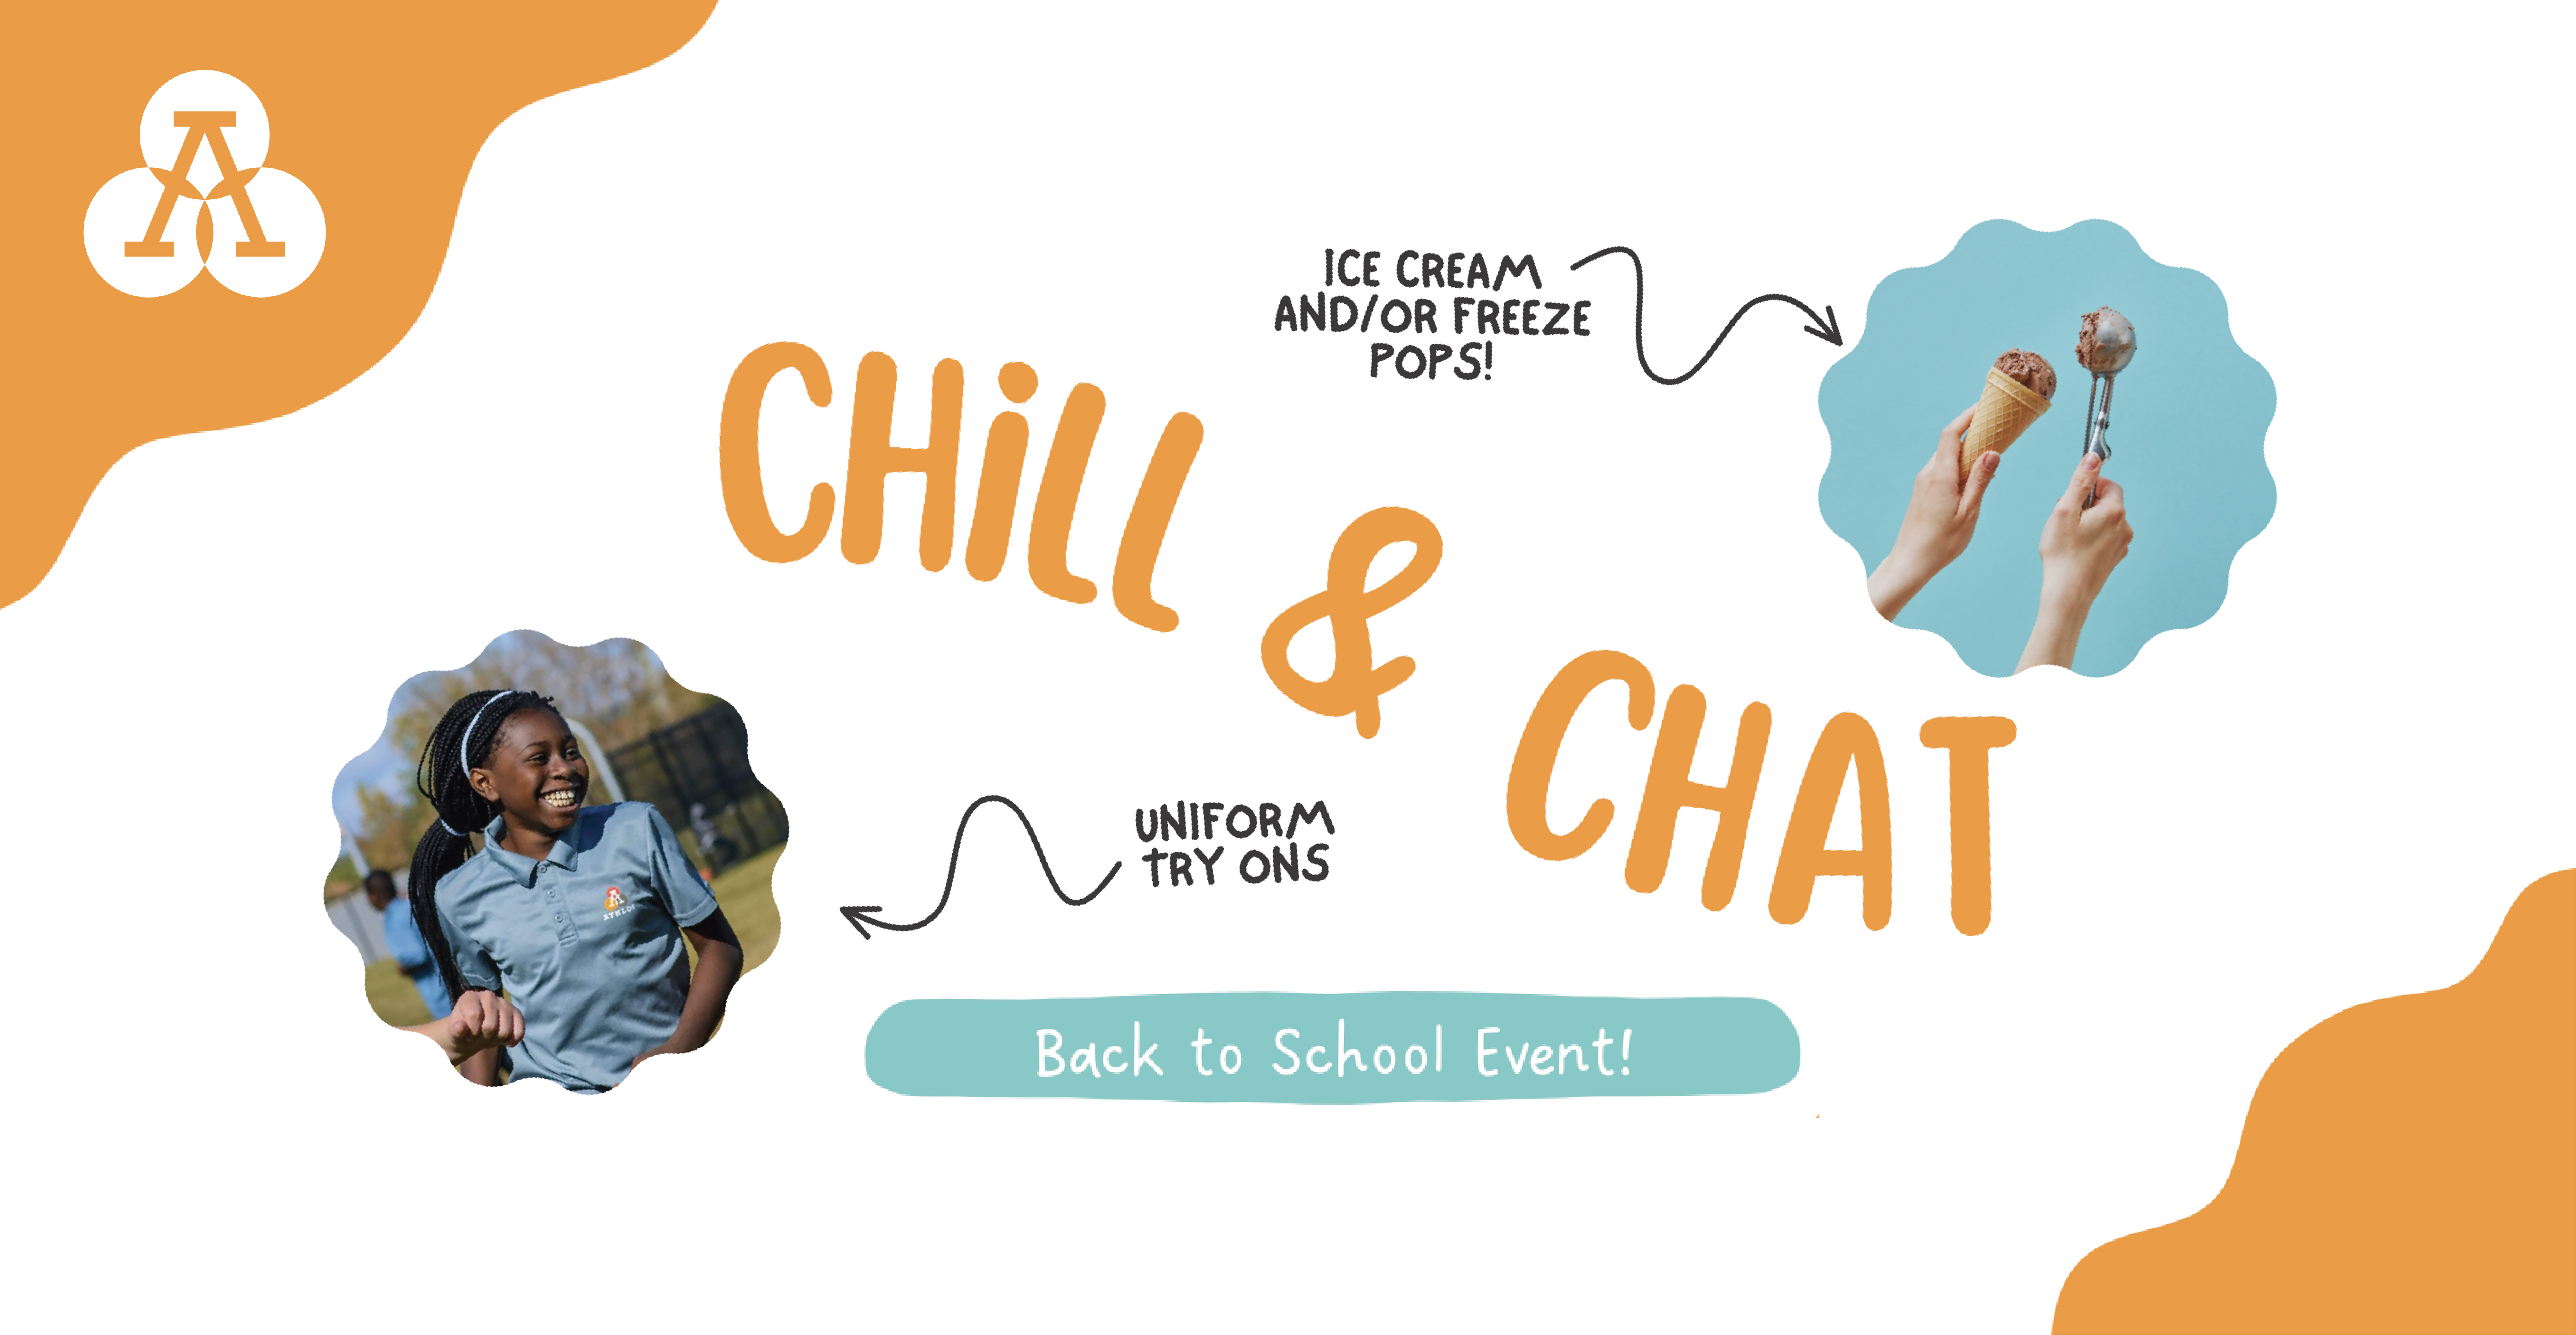 We are gearing up for the upcoming school year with an exciting 'Chill & Chat - Back to School' event on Saturday, July 27th, from 11:00 a.m. to 1:00 p.m. This family-friendly gathering promises a sweet treat with complimentary ice cream and freeze pops while keeping attendees informed about important updates for the new academic year and giving families an opportunity for uniform try-ons before school starts!